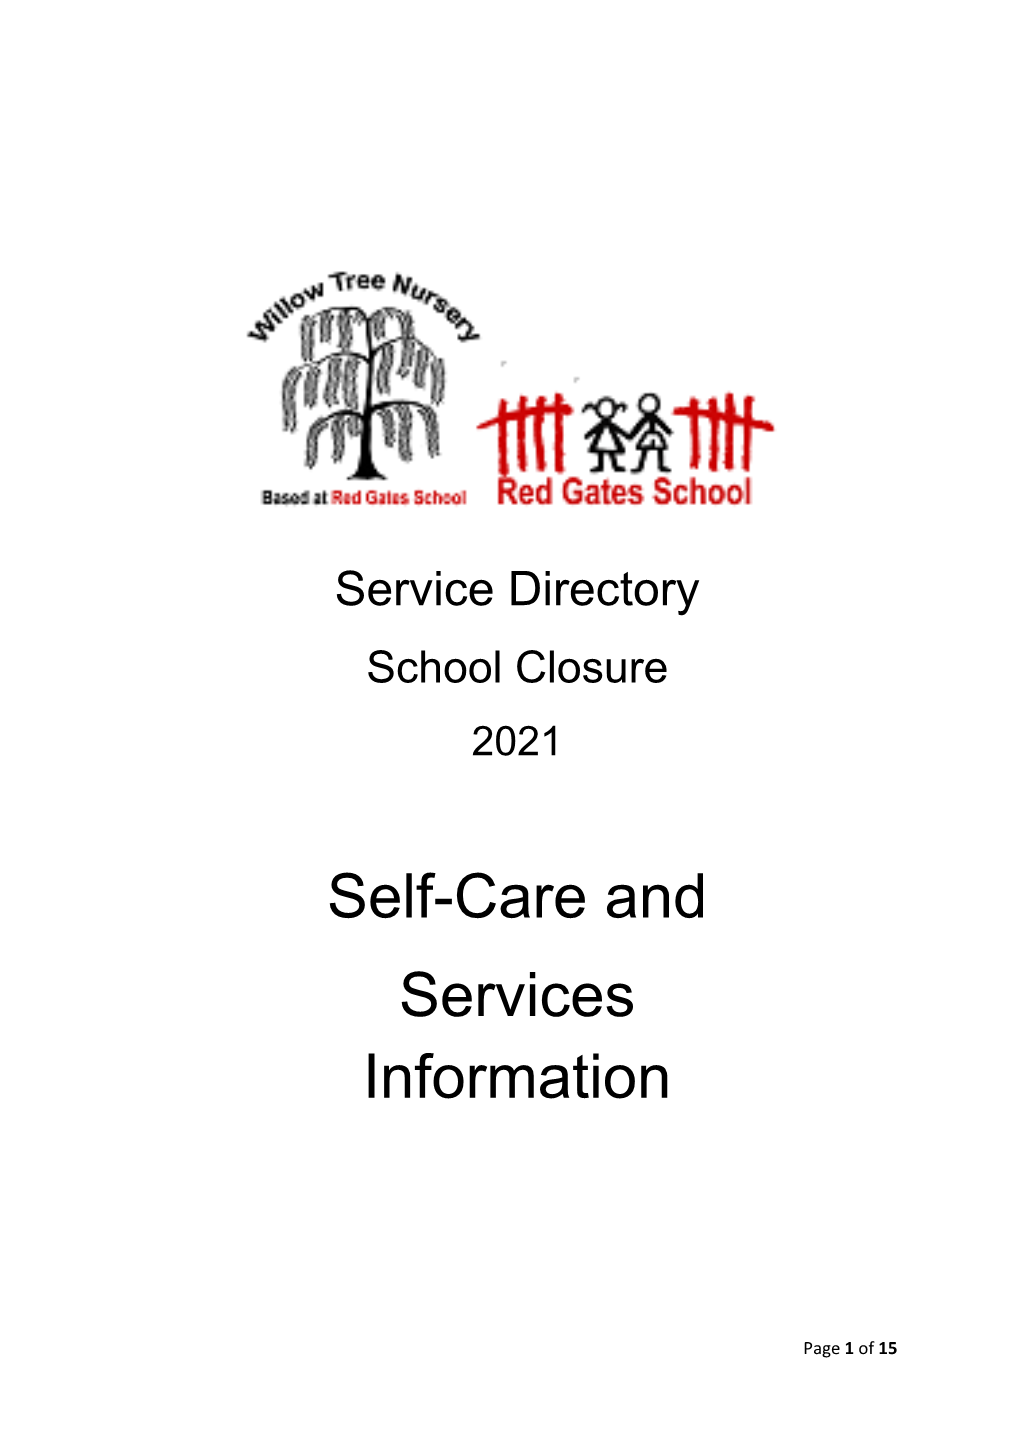 Self-Care and Services Information